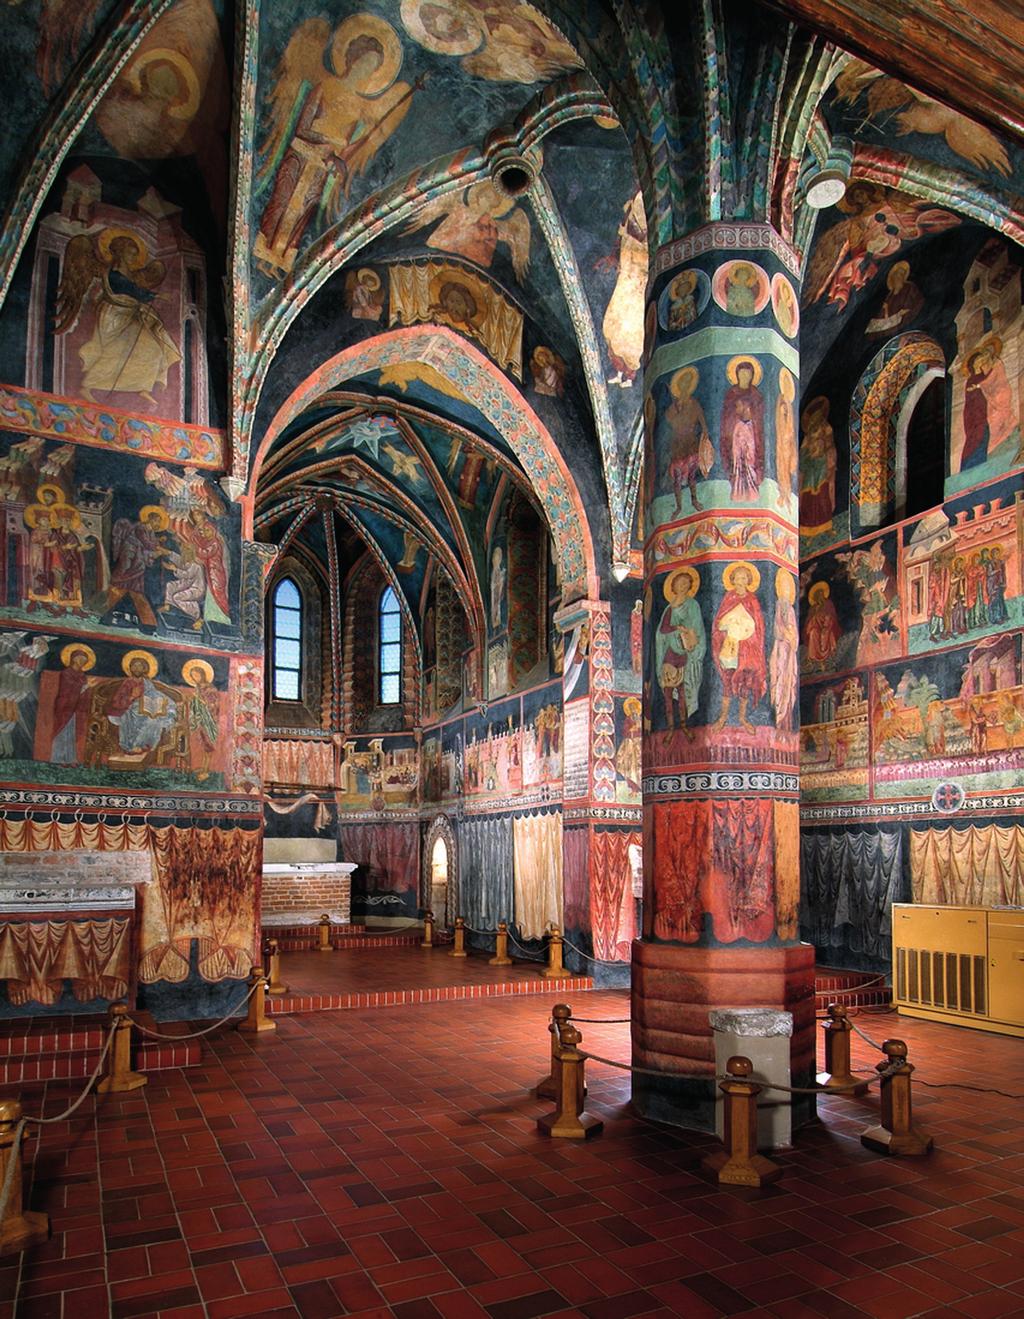 Interior of the Holy Trinity Chapel of Lublin Castle